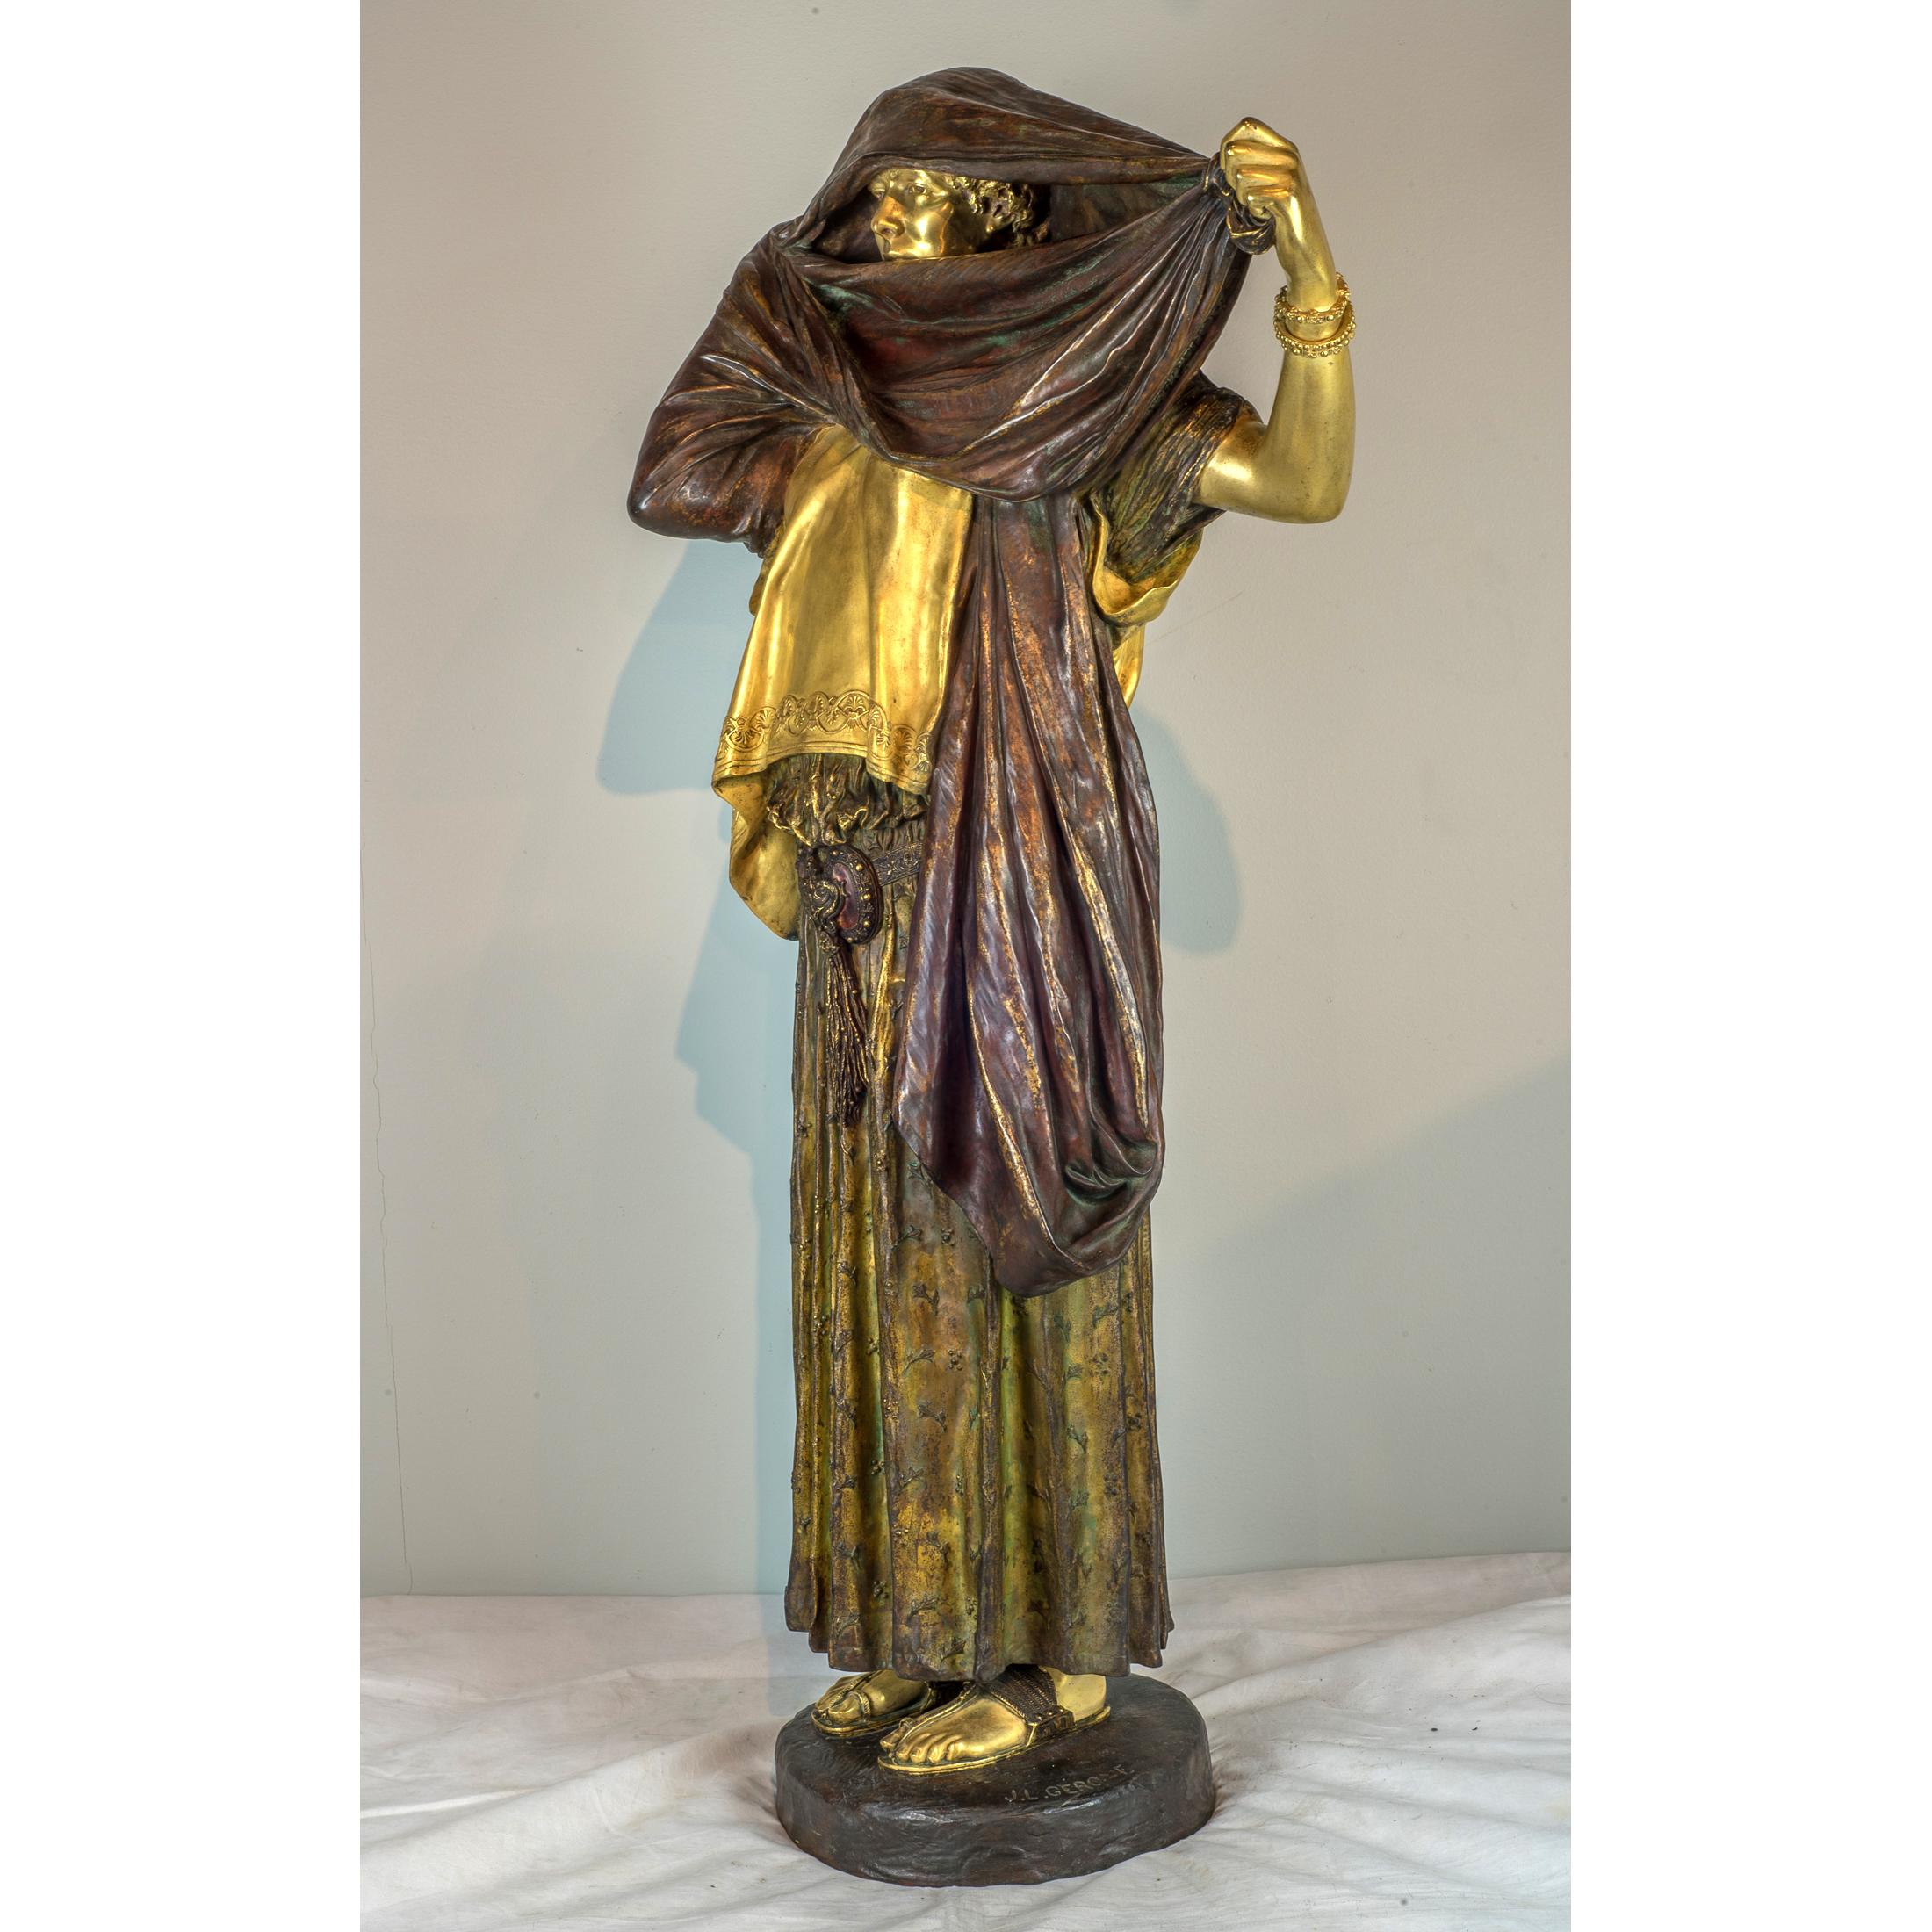 An exquisite Orientalist gilt and polychrome-patinated bronze sculpture by Jean Leon Gerome. Signed to base: J. L. Gerome, stamped verso: 0195, with circular foundry mark: Siot Decauville / Fondeur / Paris 

Title: 